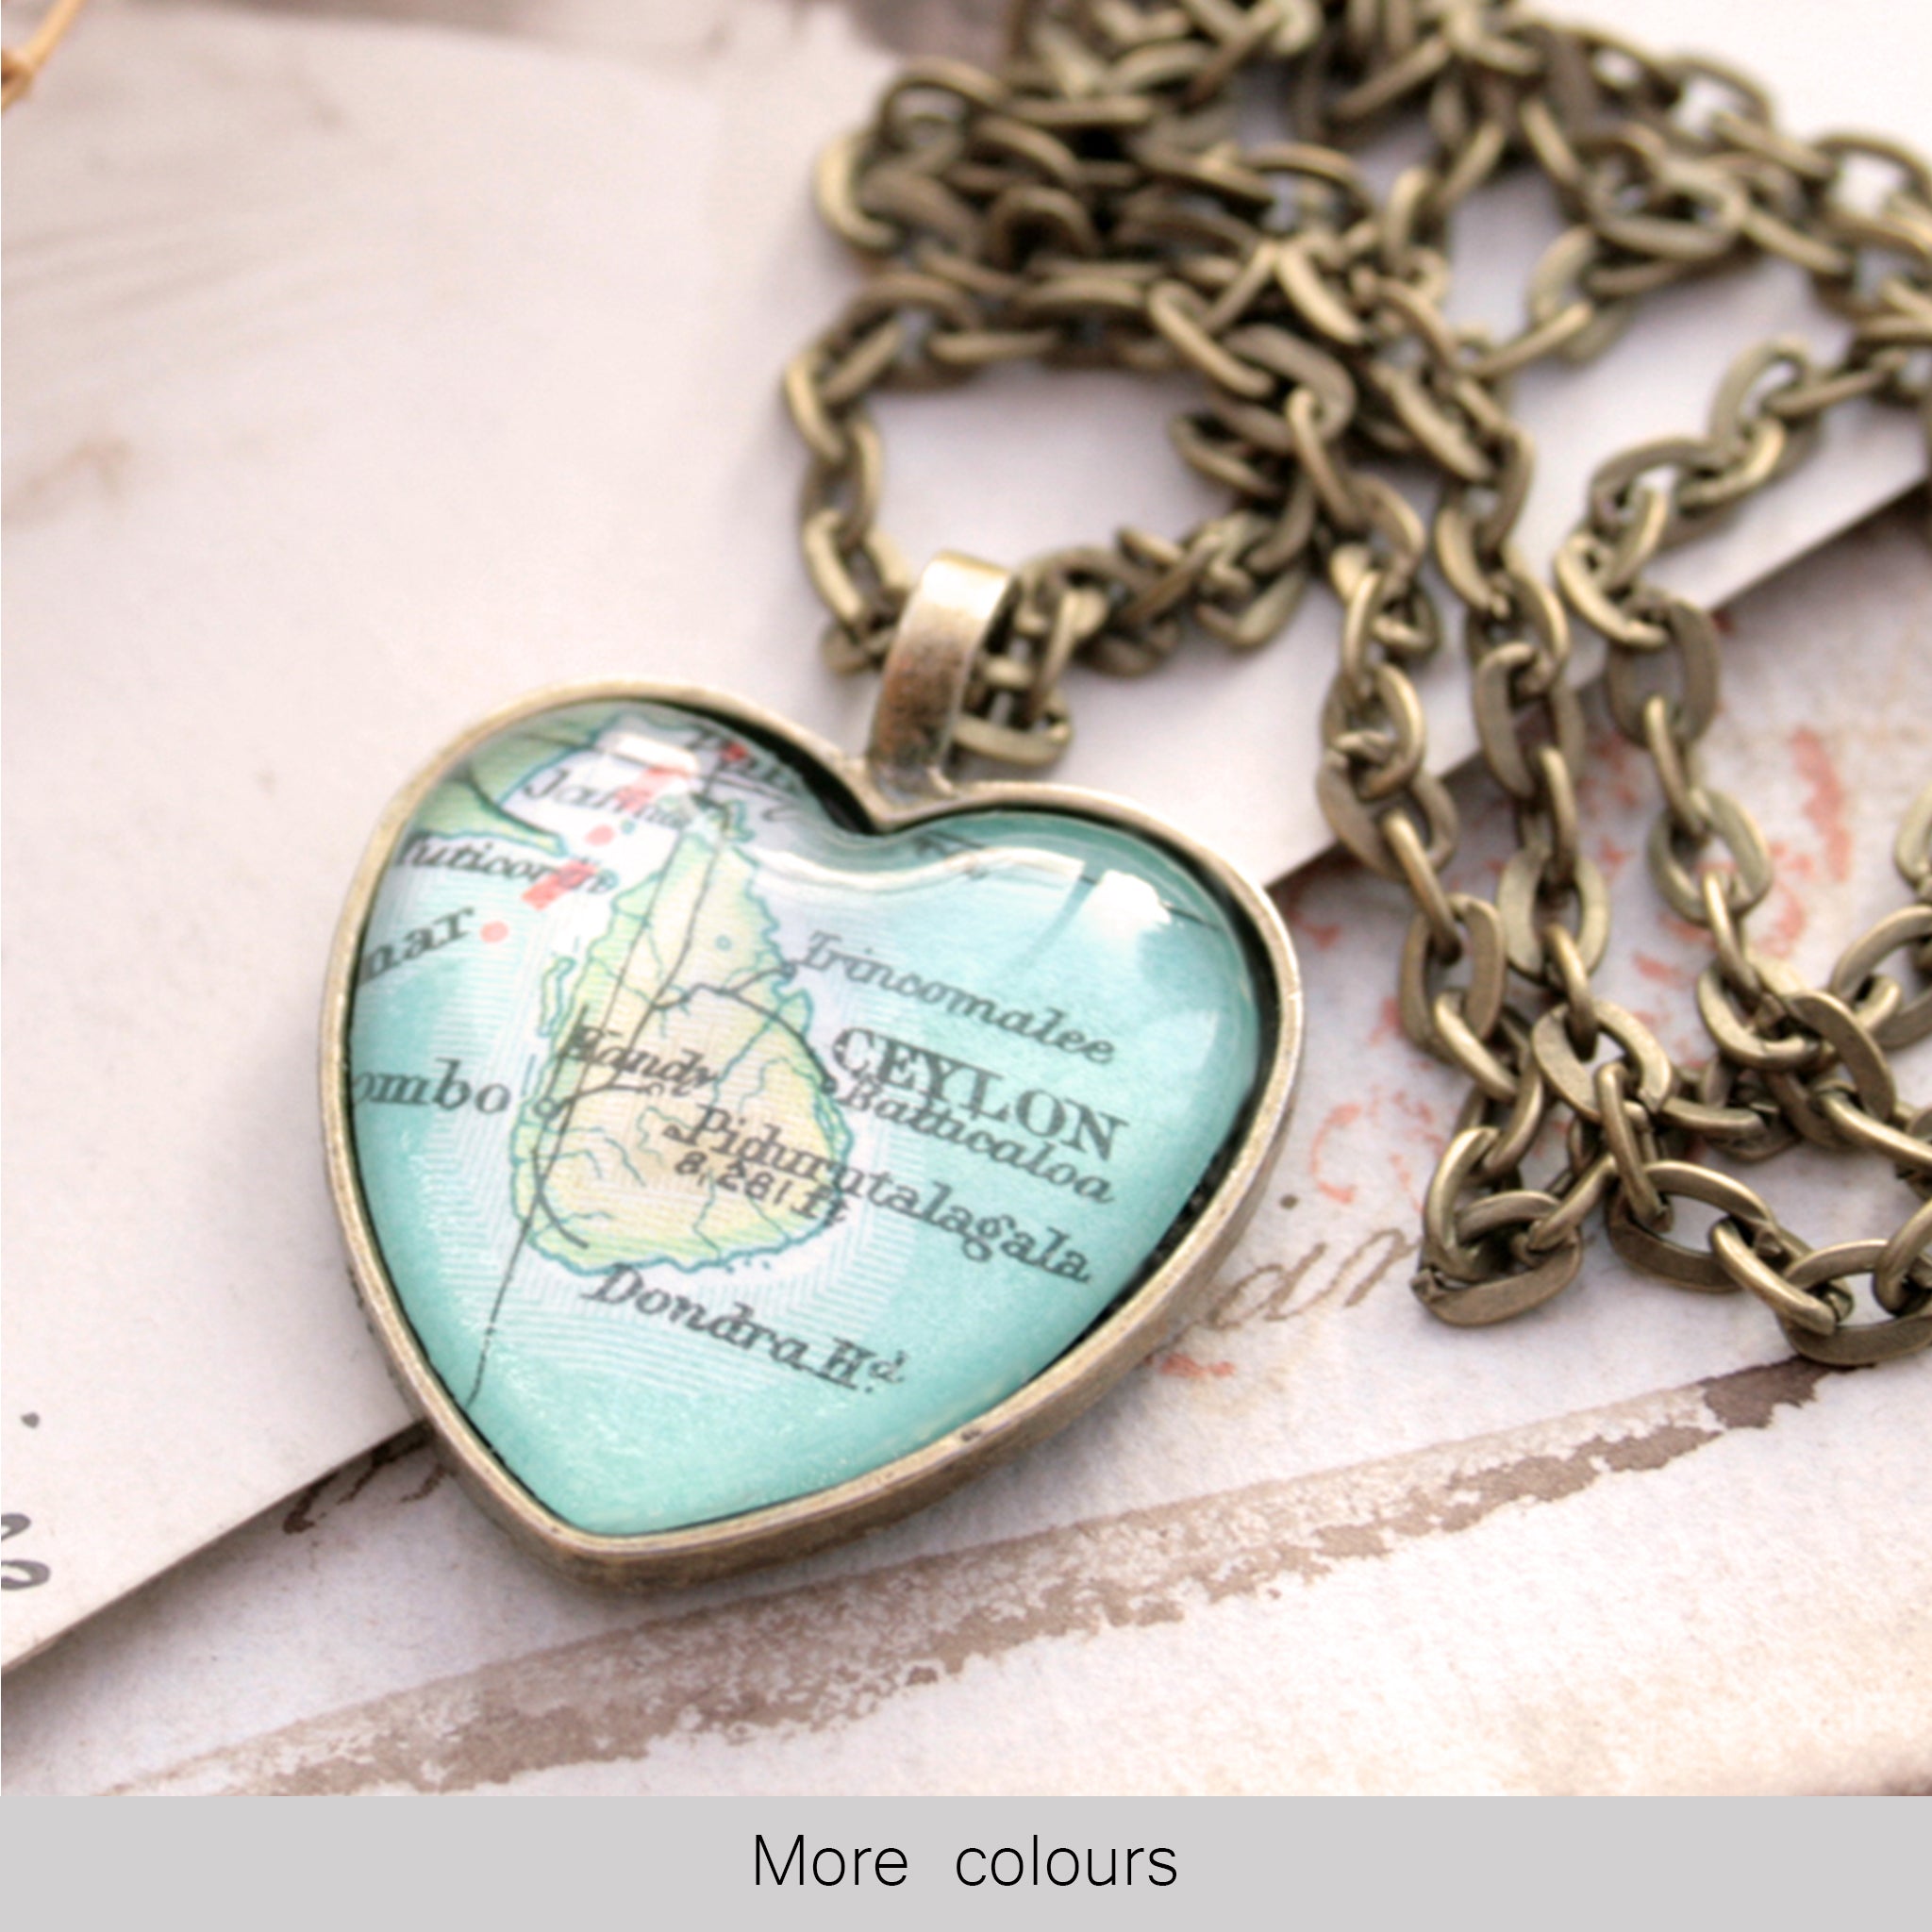 Heart shaped pendant necklace in bronze tone featuring map of Ceylon